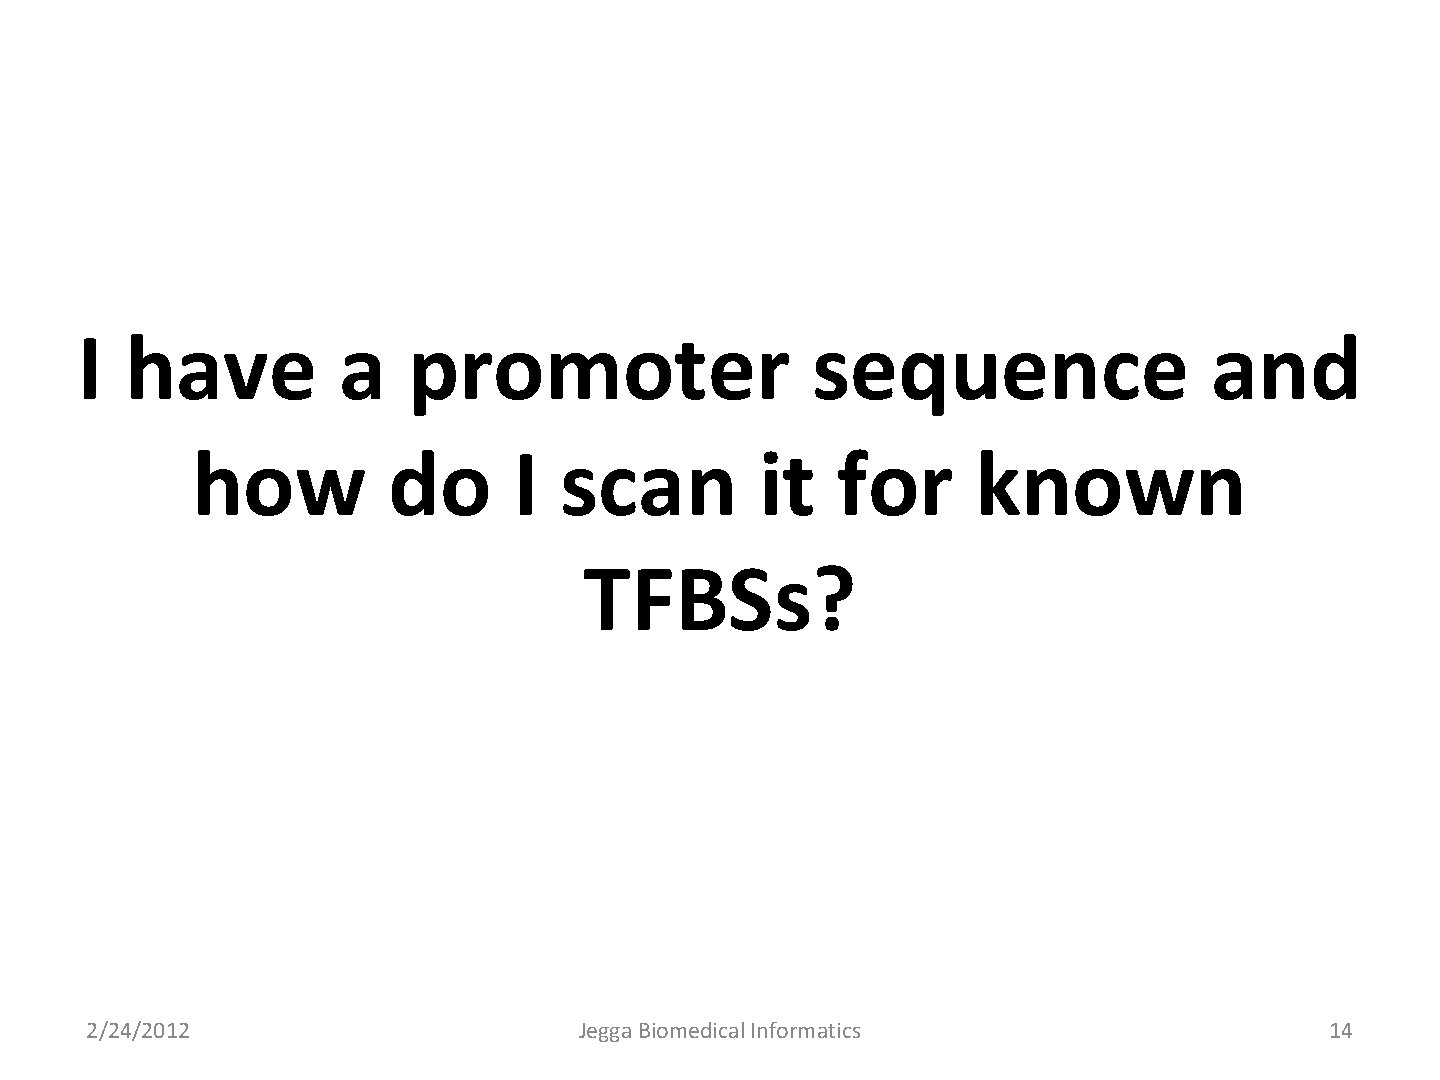 I have a promoter sequence and how do I scan it for known TFBSs?